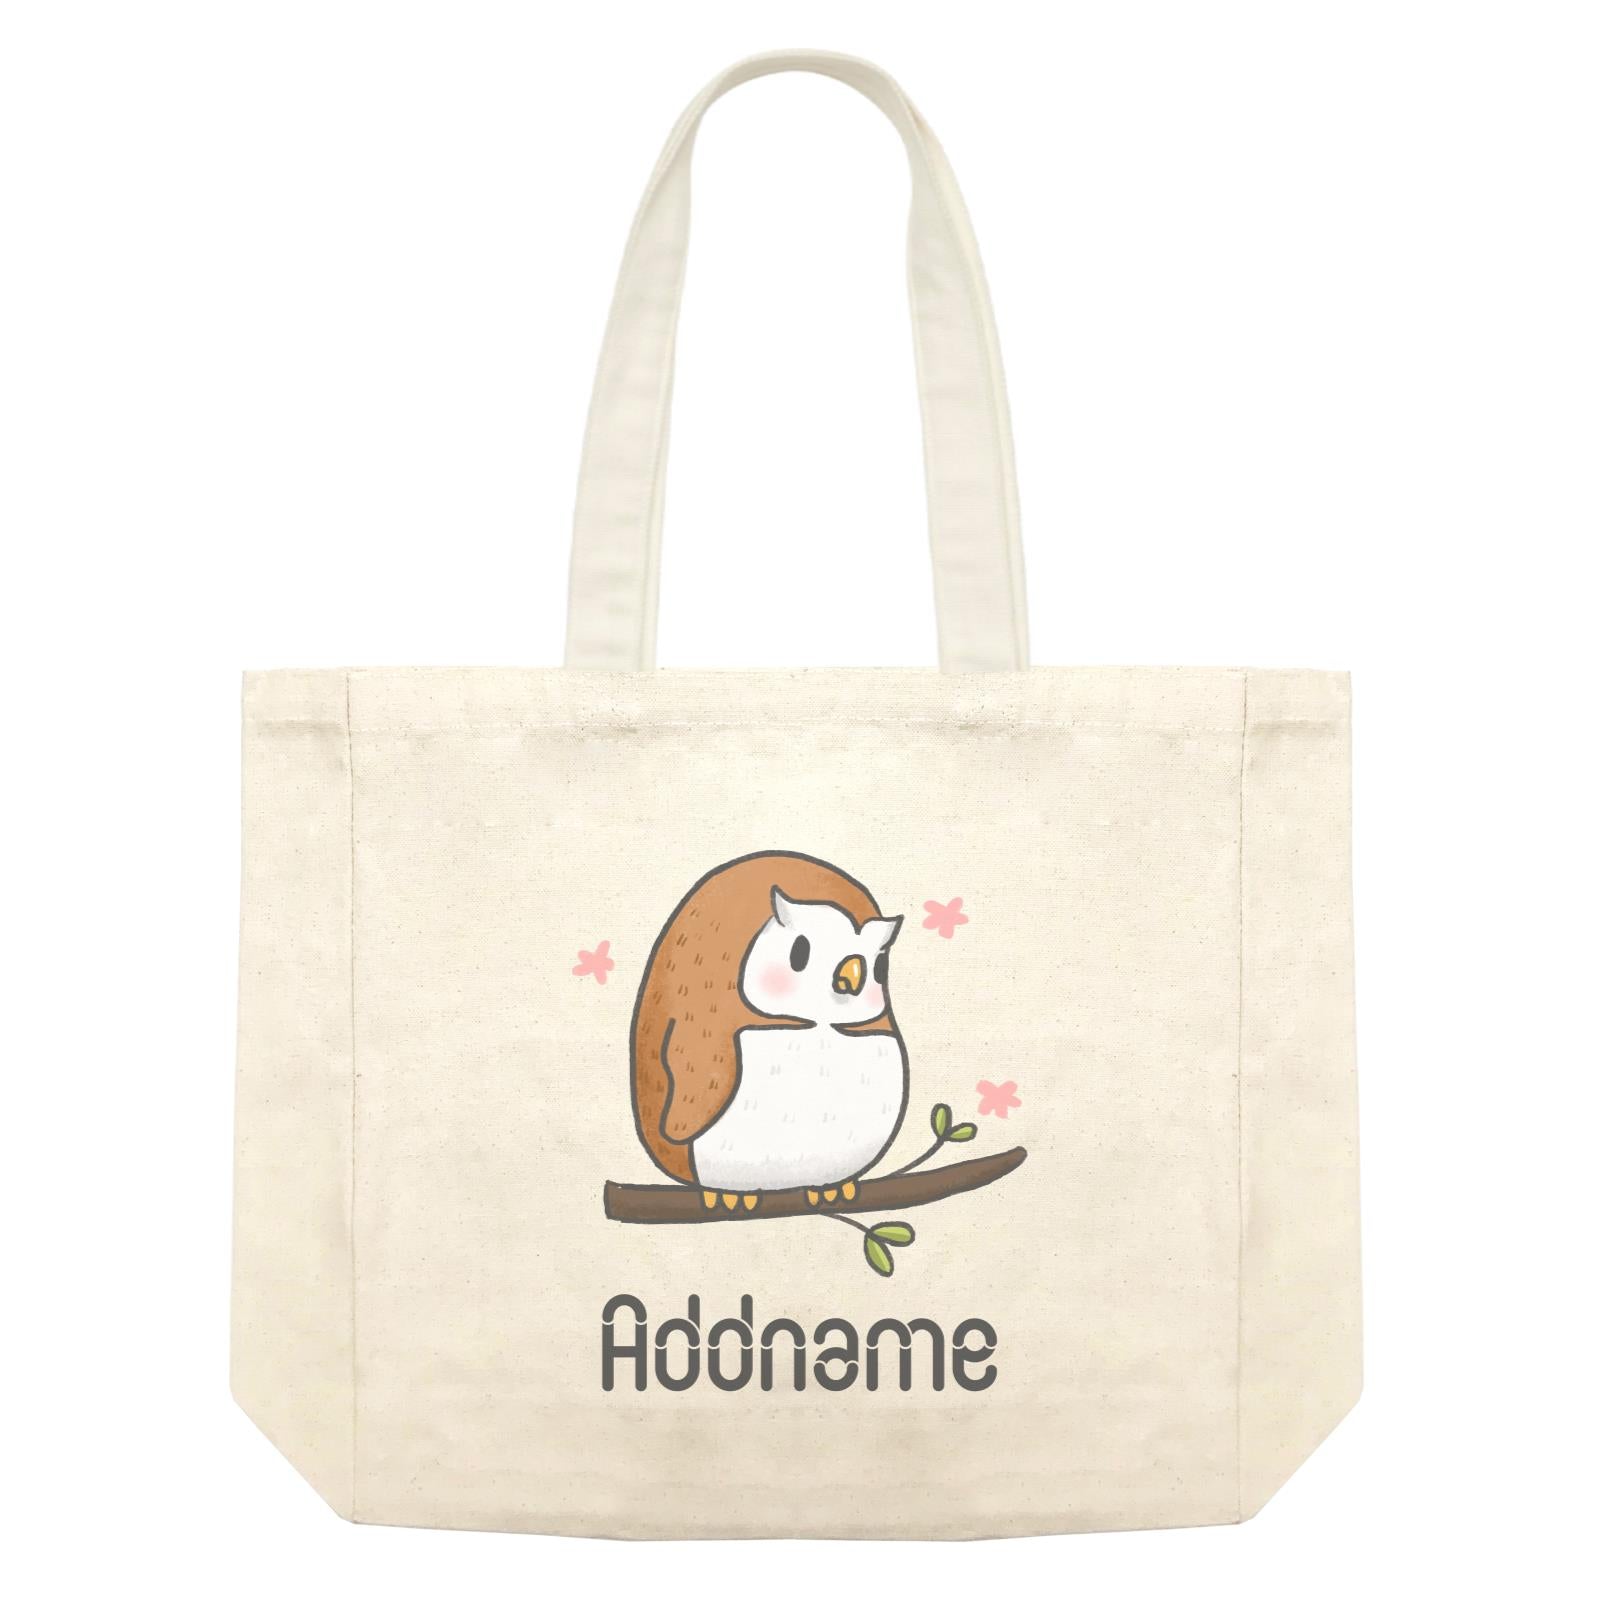 Cute Hand Drawn Style Owl Addname Shopping Bag